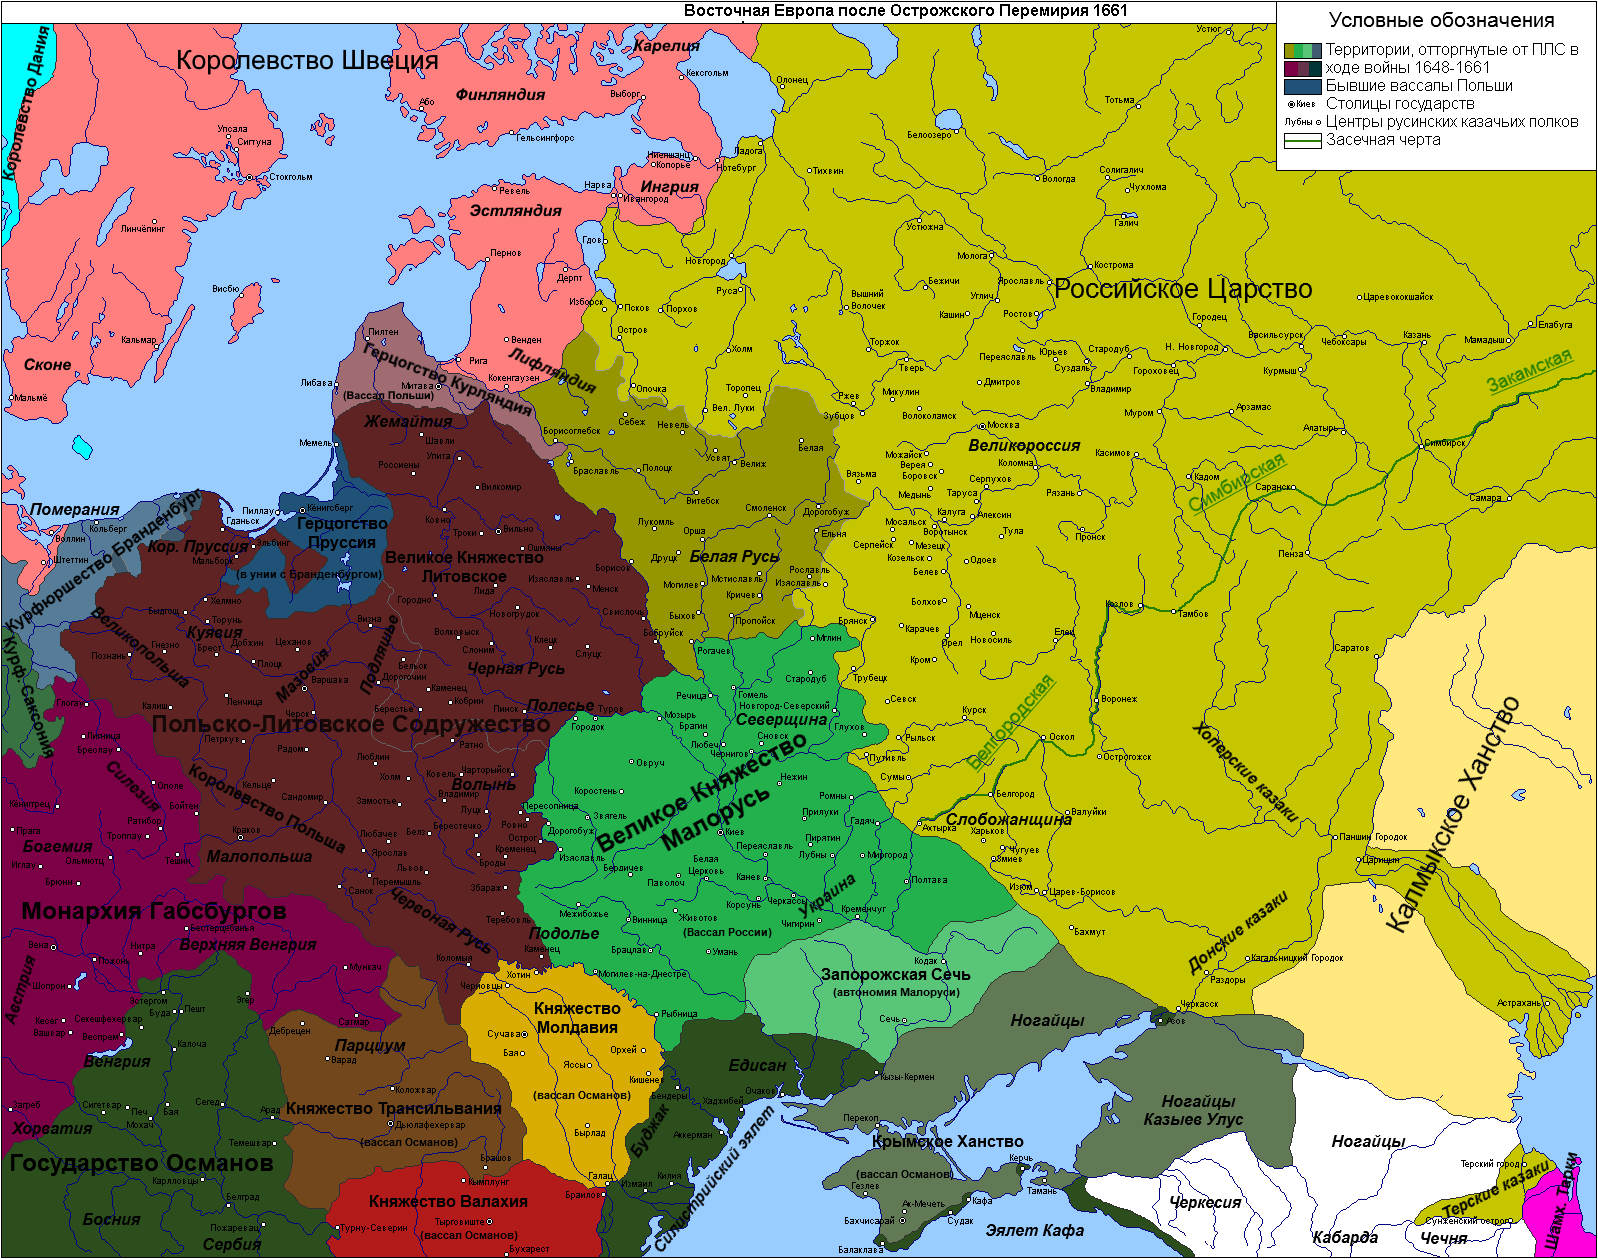 eastern_europe_after_the_ostrog_truce_of_1661_by_vladyslav_ai-dbswxya.png